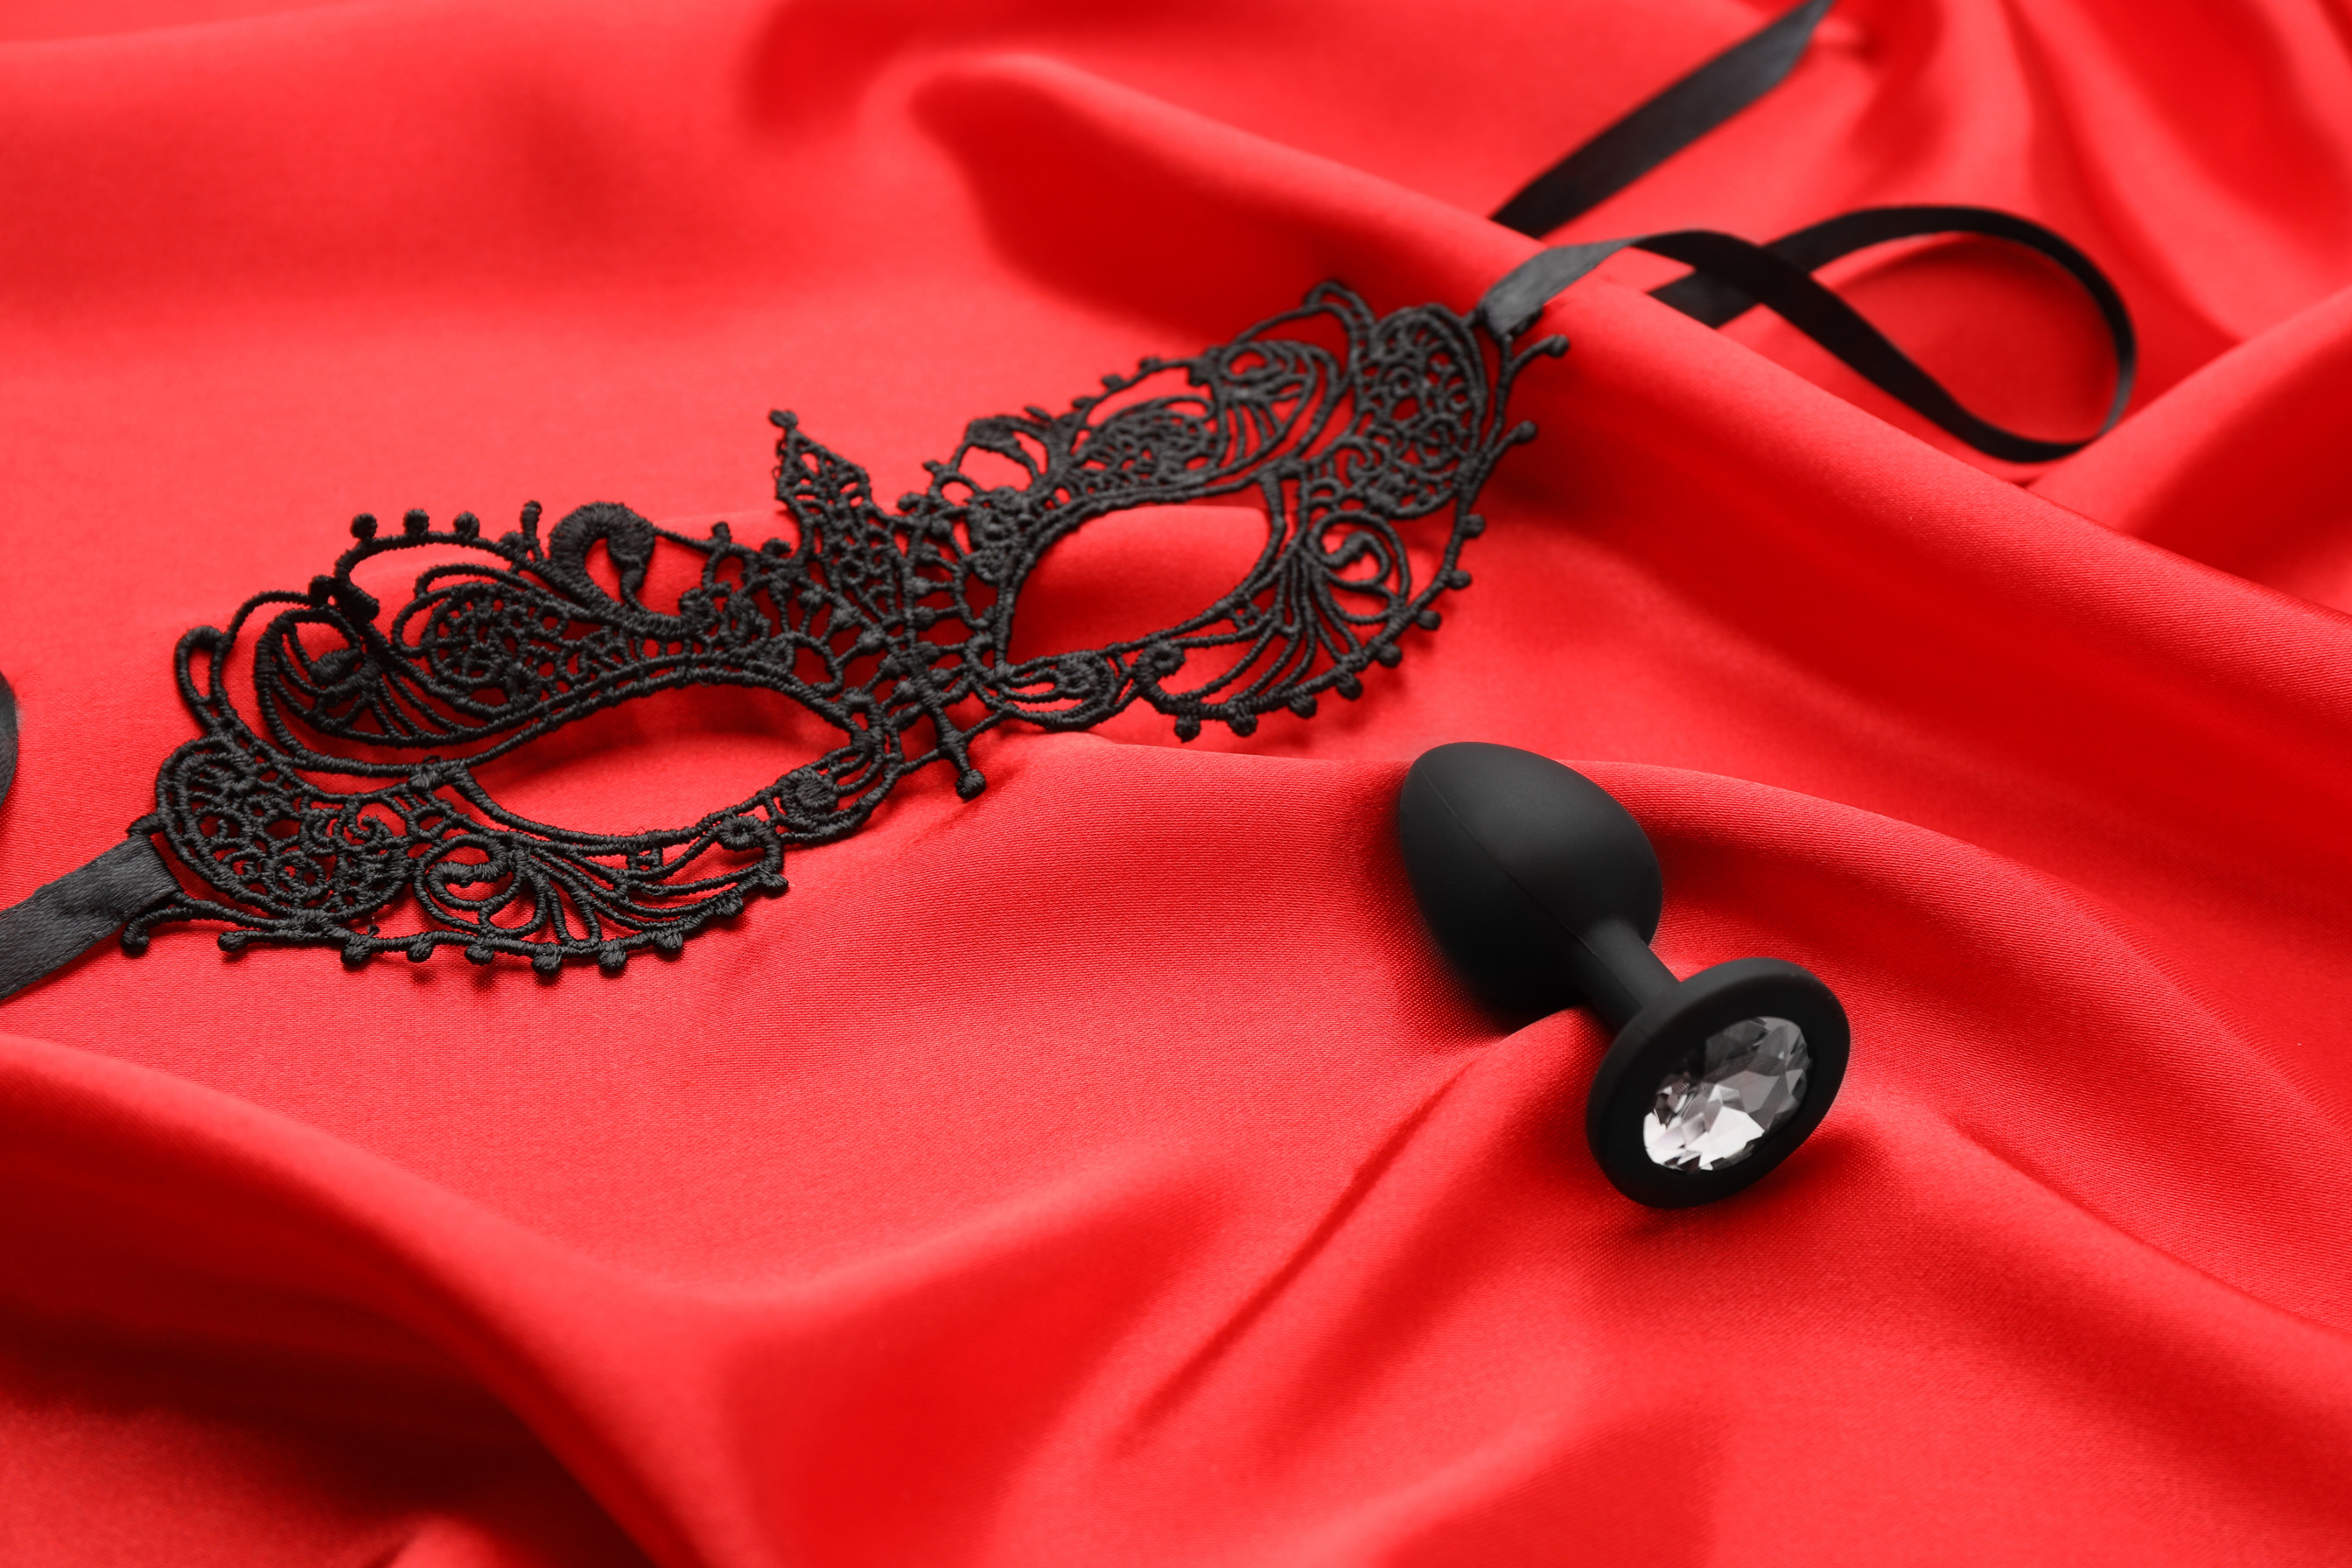 Black Lace Mask and  Plug on Red Fabric